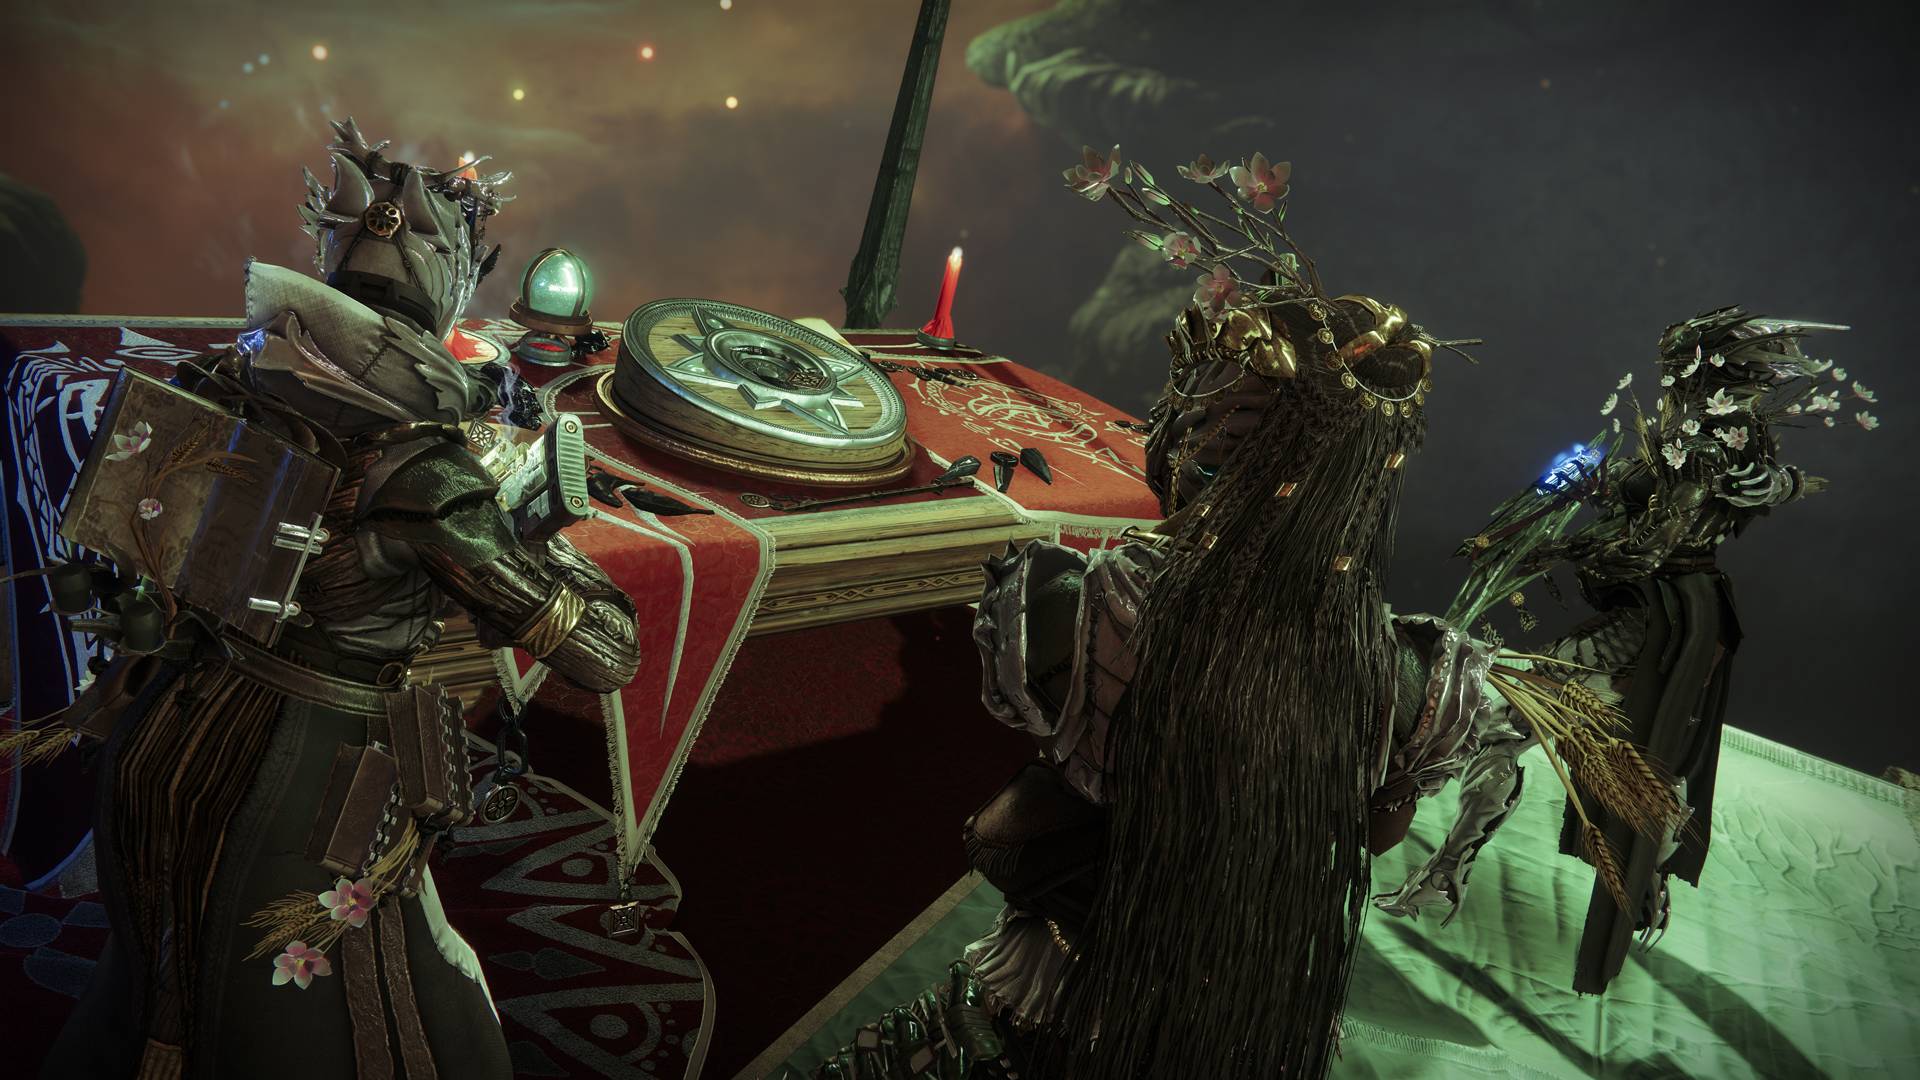 Destiny 2 Season of the Witch guardians looking at arcana cards on lectern of divination